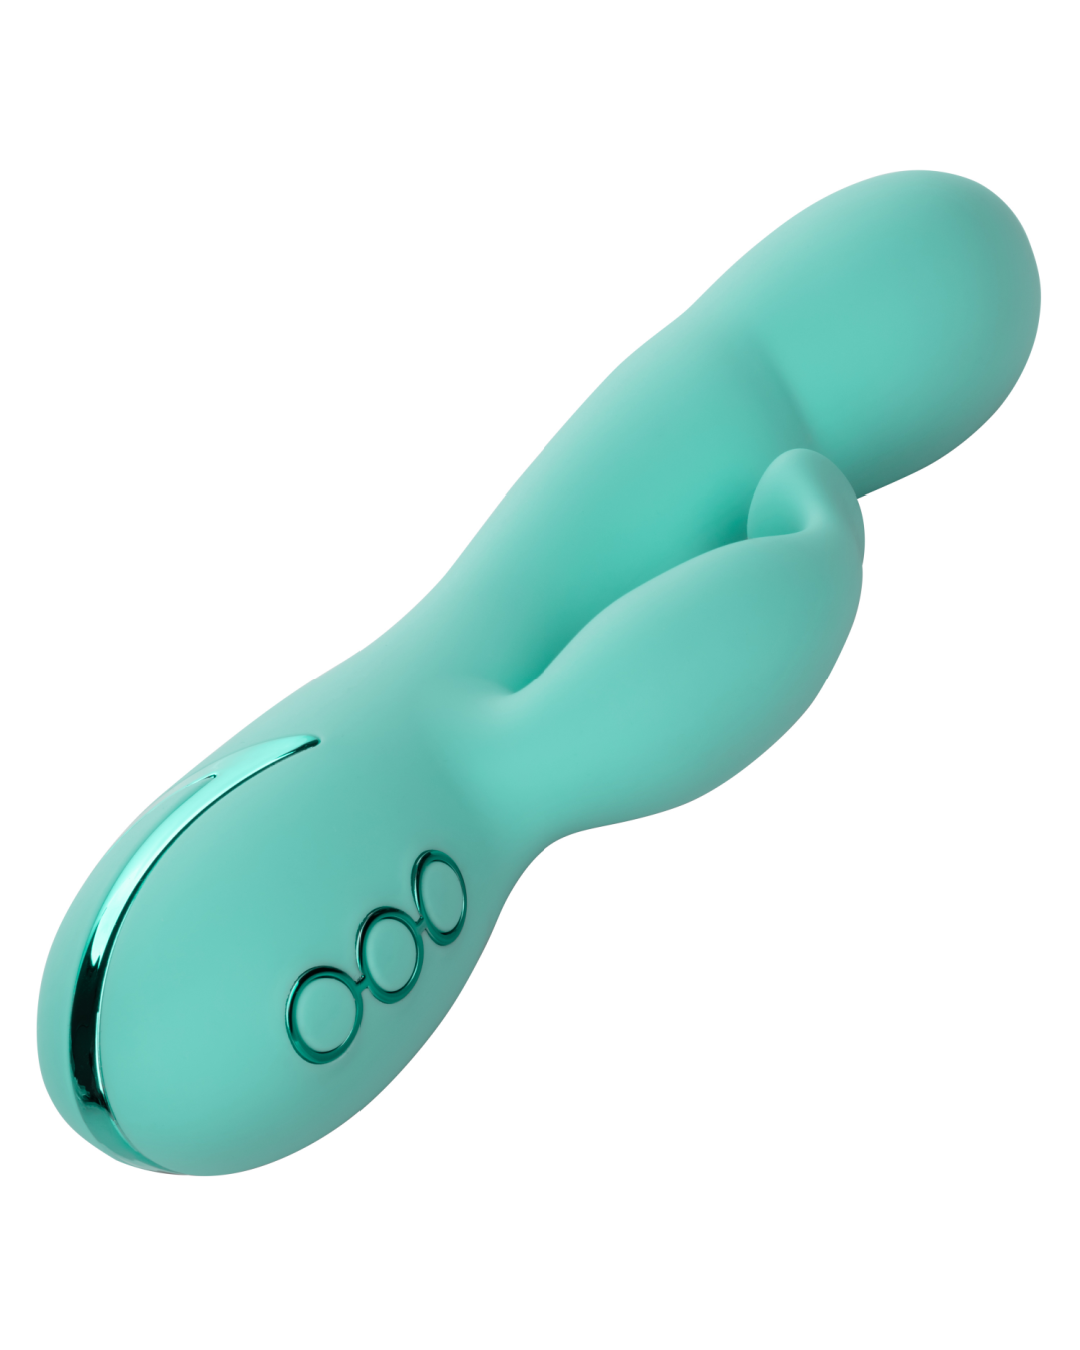 California Dreaming Tahoe Temptation Vibrator side view  of the base and buttons